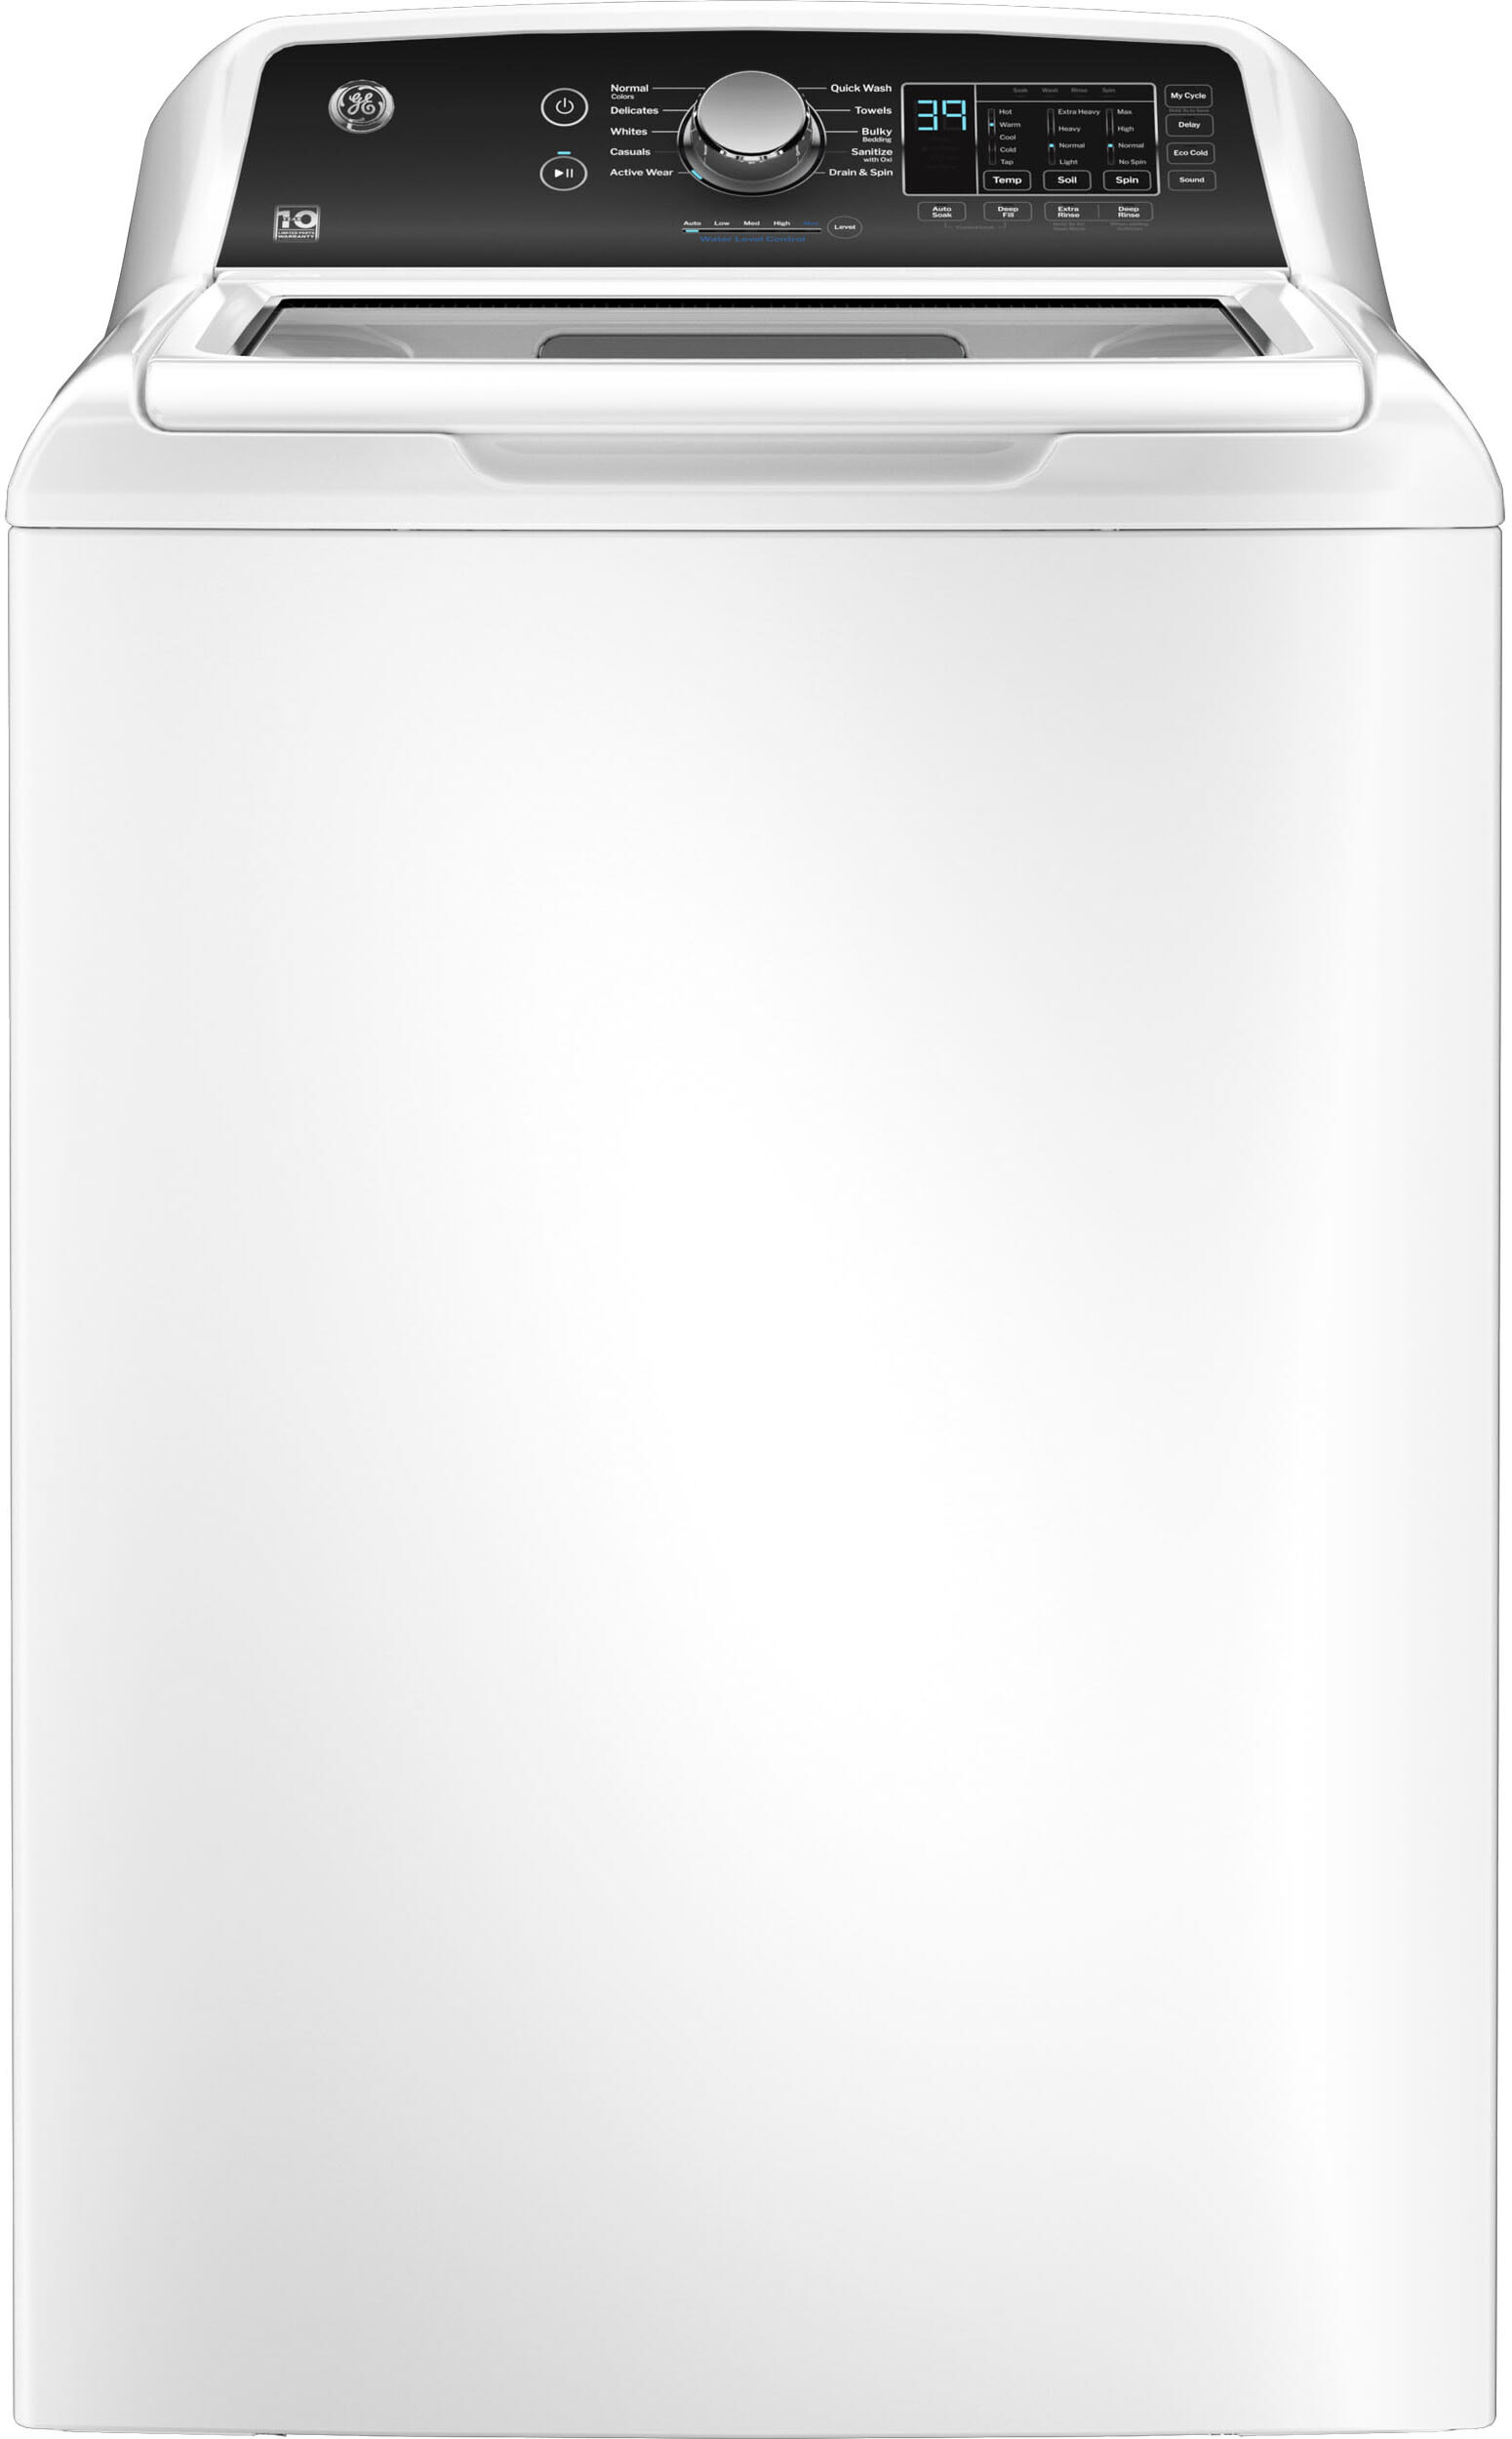 27 Inch Top Load Washer